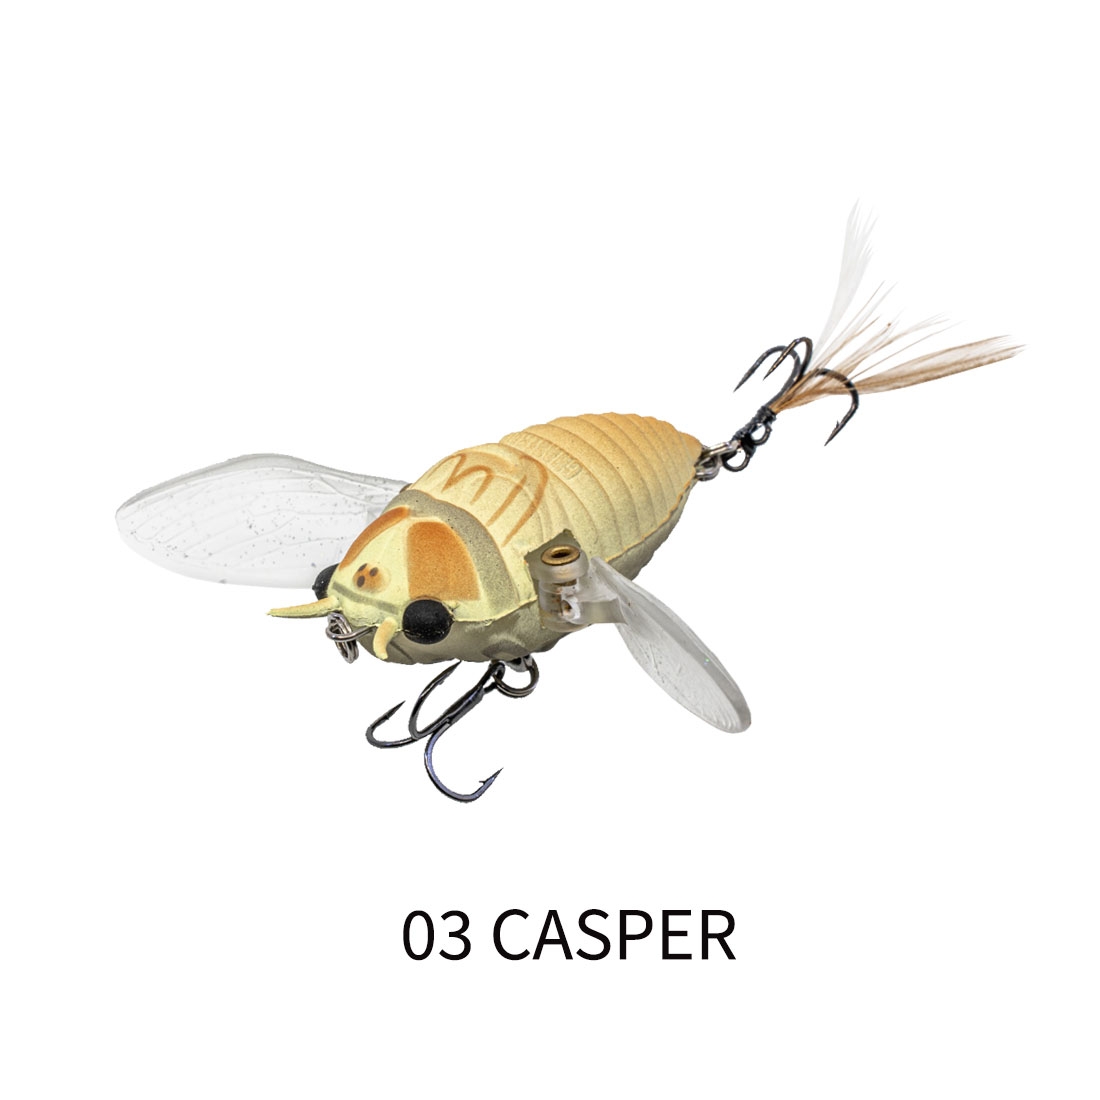 JUST LANDED: The Ripple Cicada is here!  Make some noise for The Ripple  Cicada, our latest topwater crawler! 🎣 Soft & hollow body for longer bites  🔊 Mimics sounds of cicada